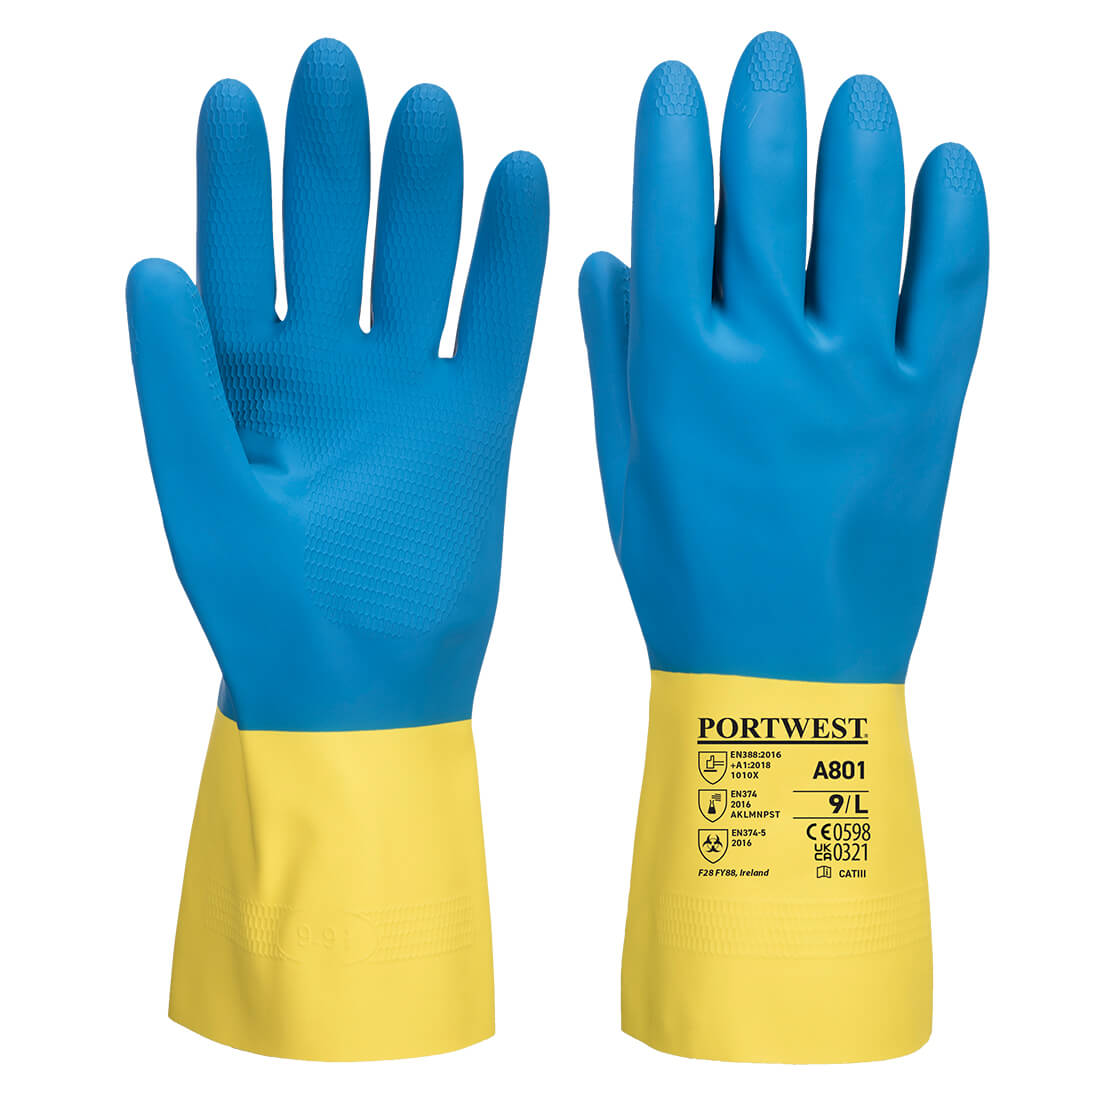 Portwest A801 - Double Dipped Latex Gauntlet